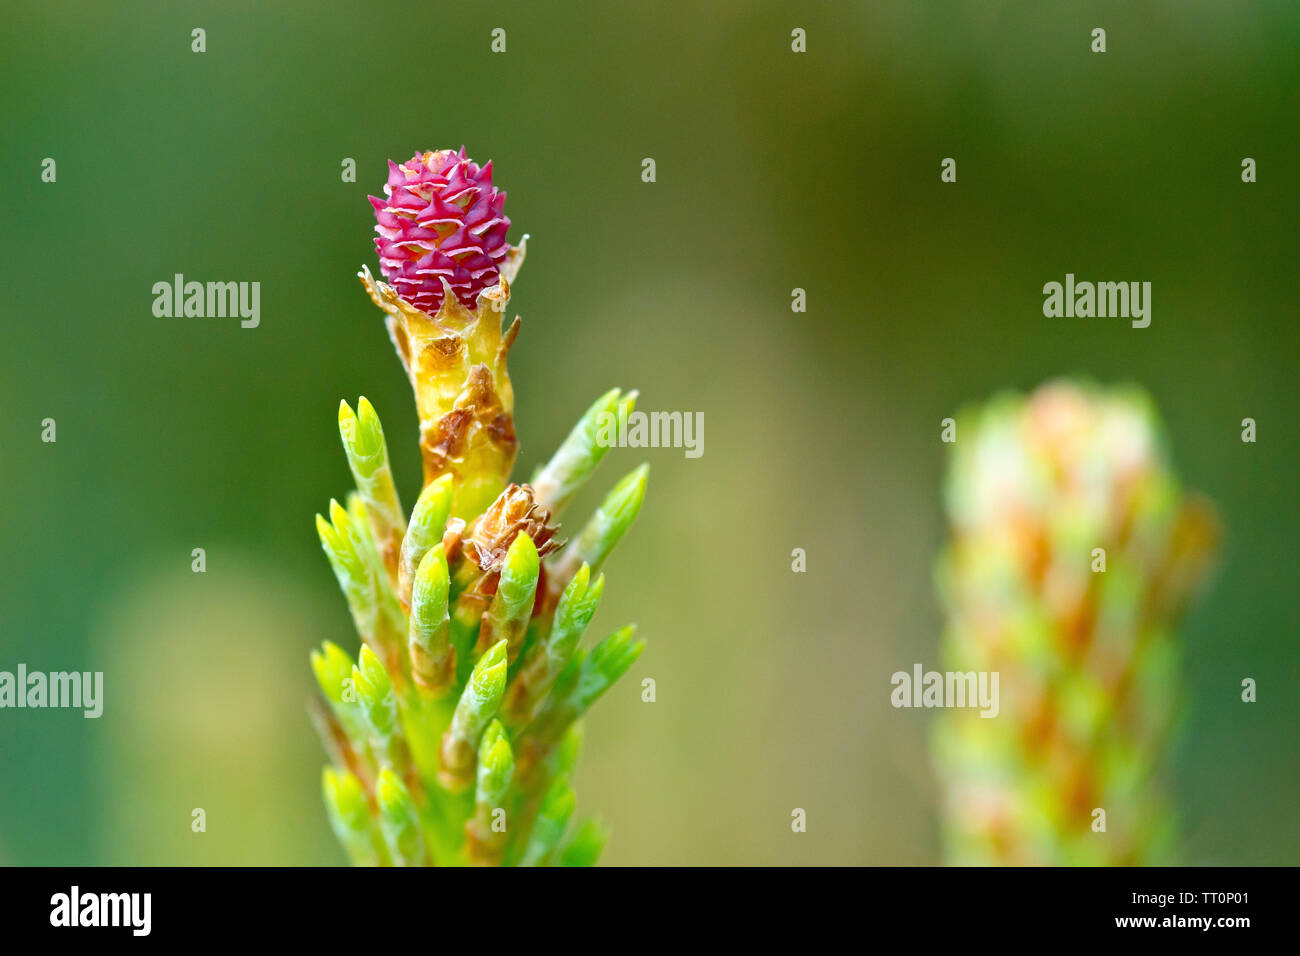 Scot's Pine (pinus sylvestris), close up of new spring growth showing the emerging needles and the pink female flower. Stock Photo